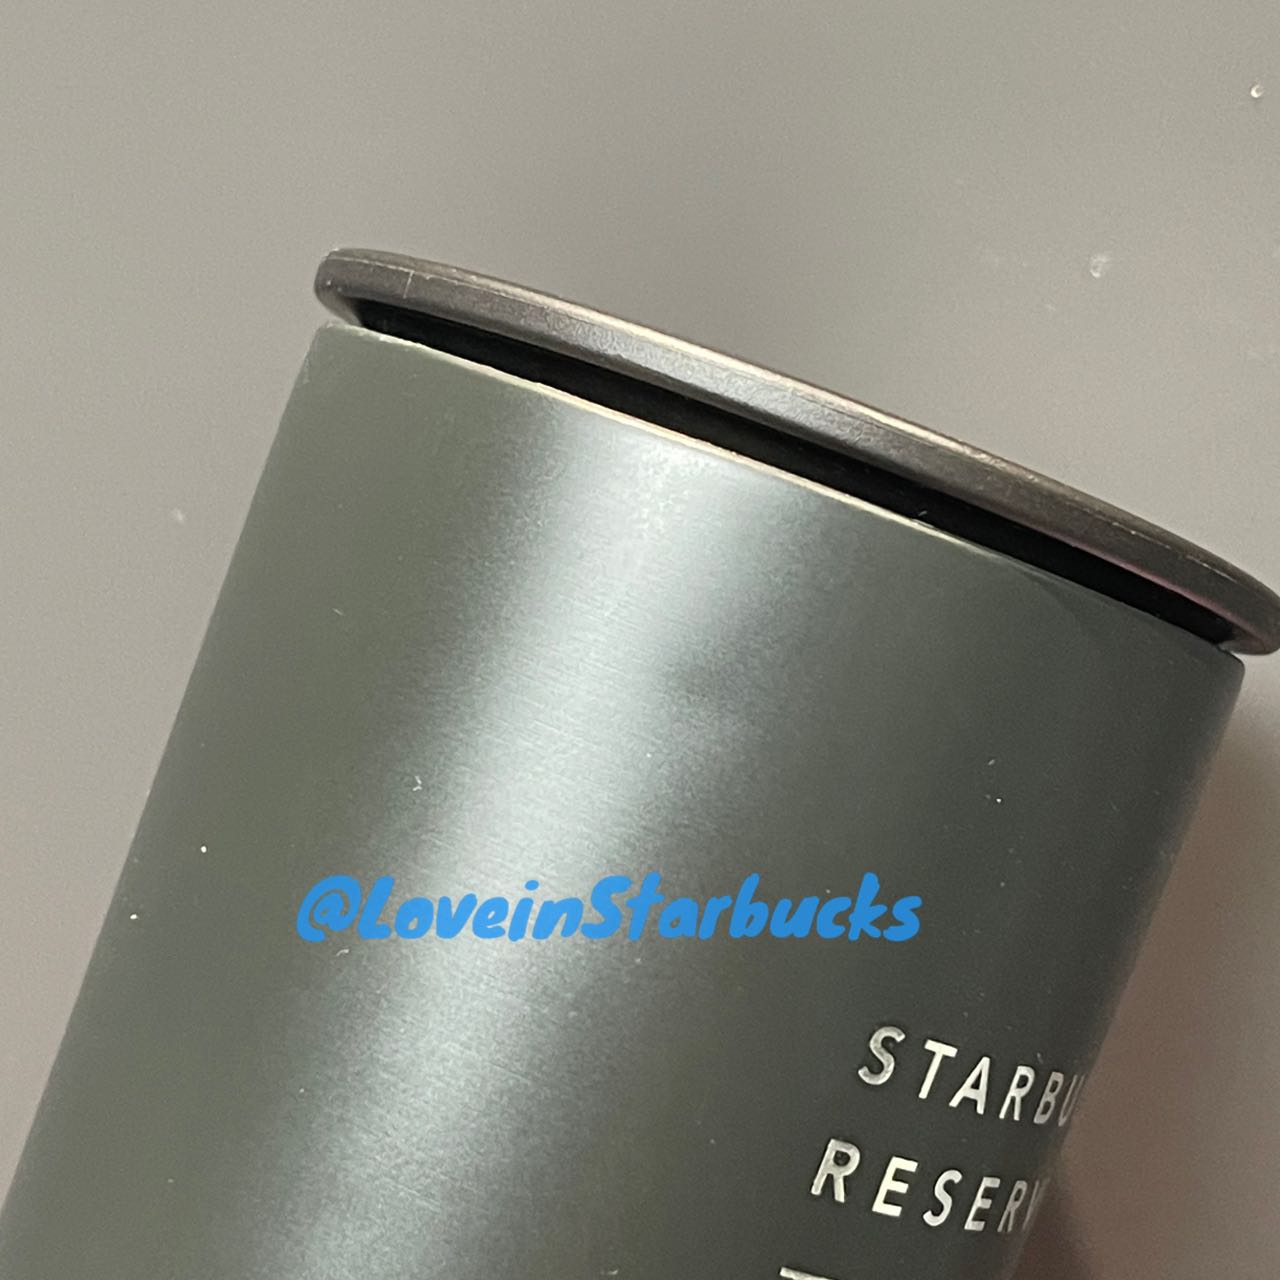 Starbucks stainless steel cup